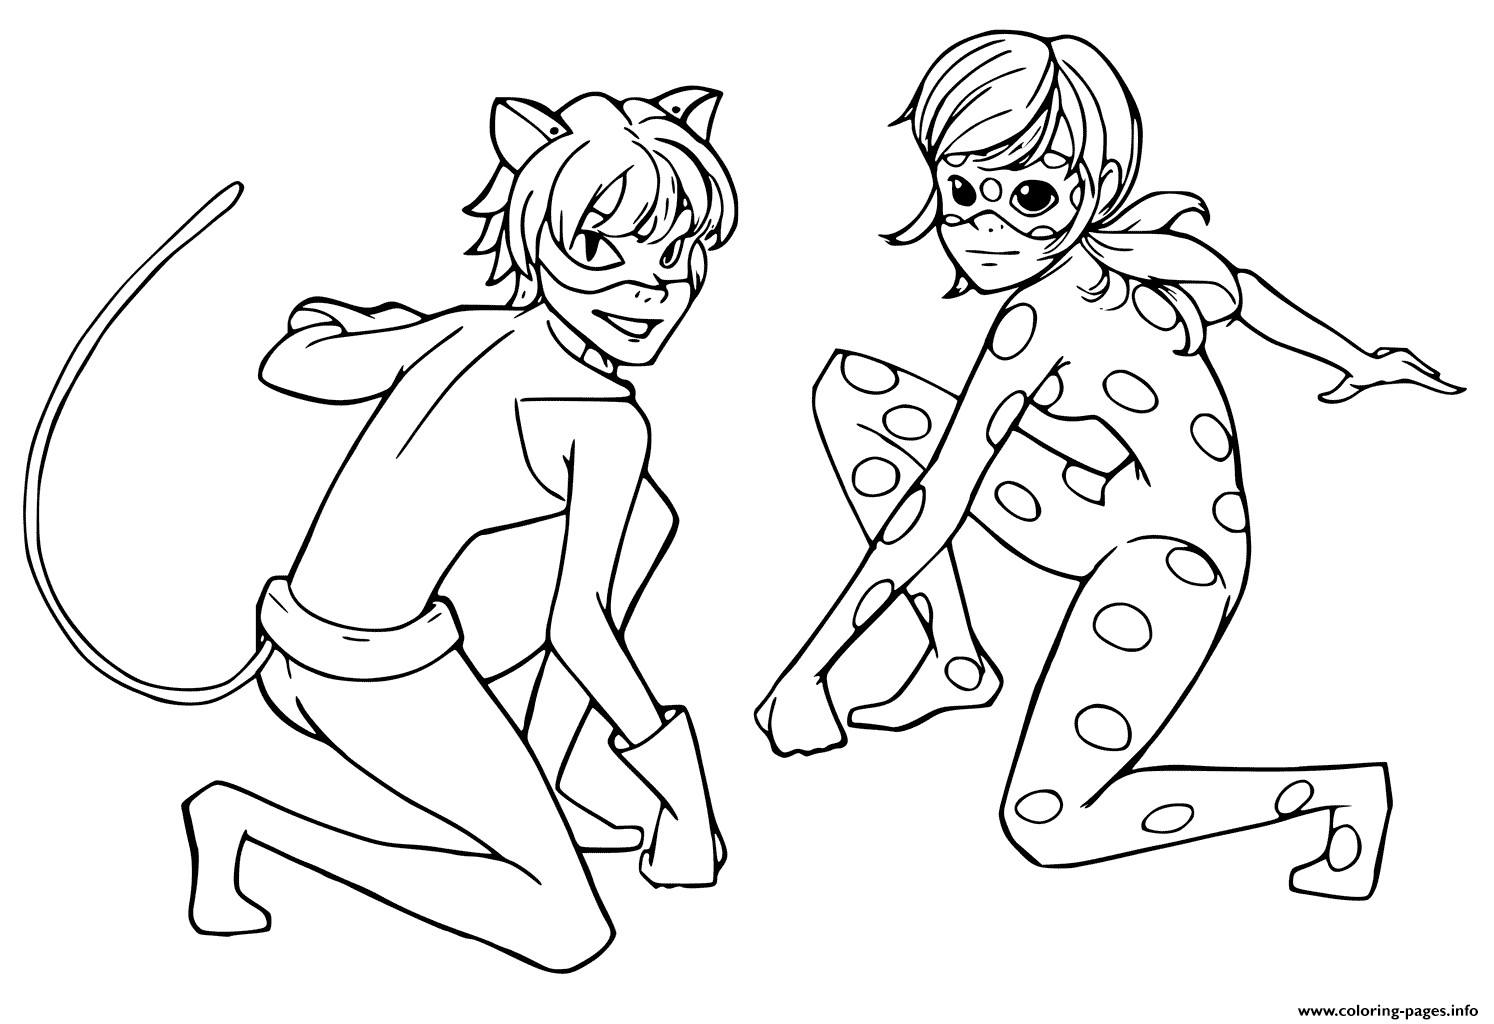 Miraculous Ladybug Coloring Pages Printable
 Print Miraculous Tales of Ladybug Cat Noir Kids coloring